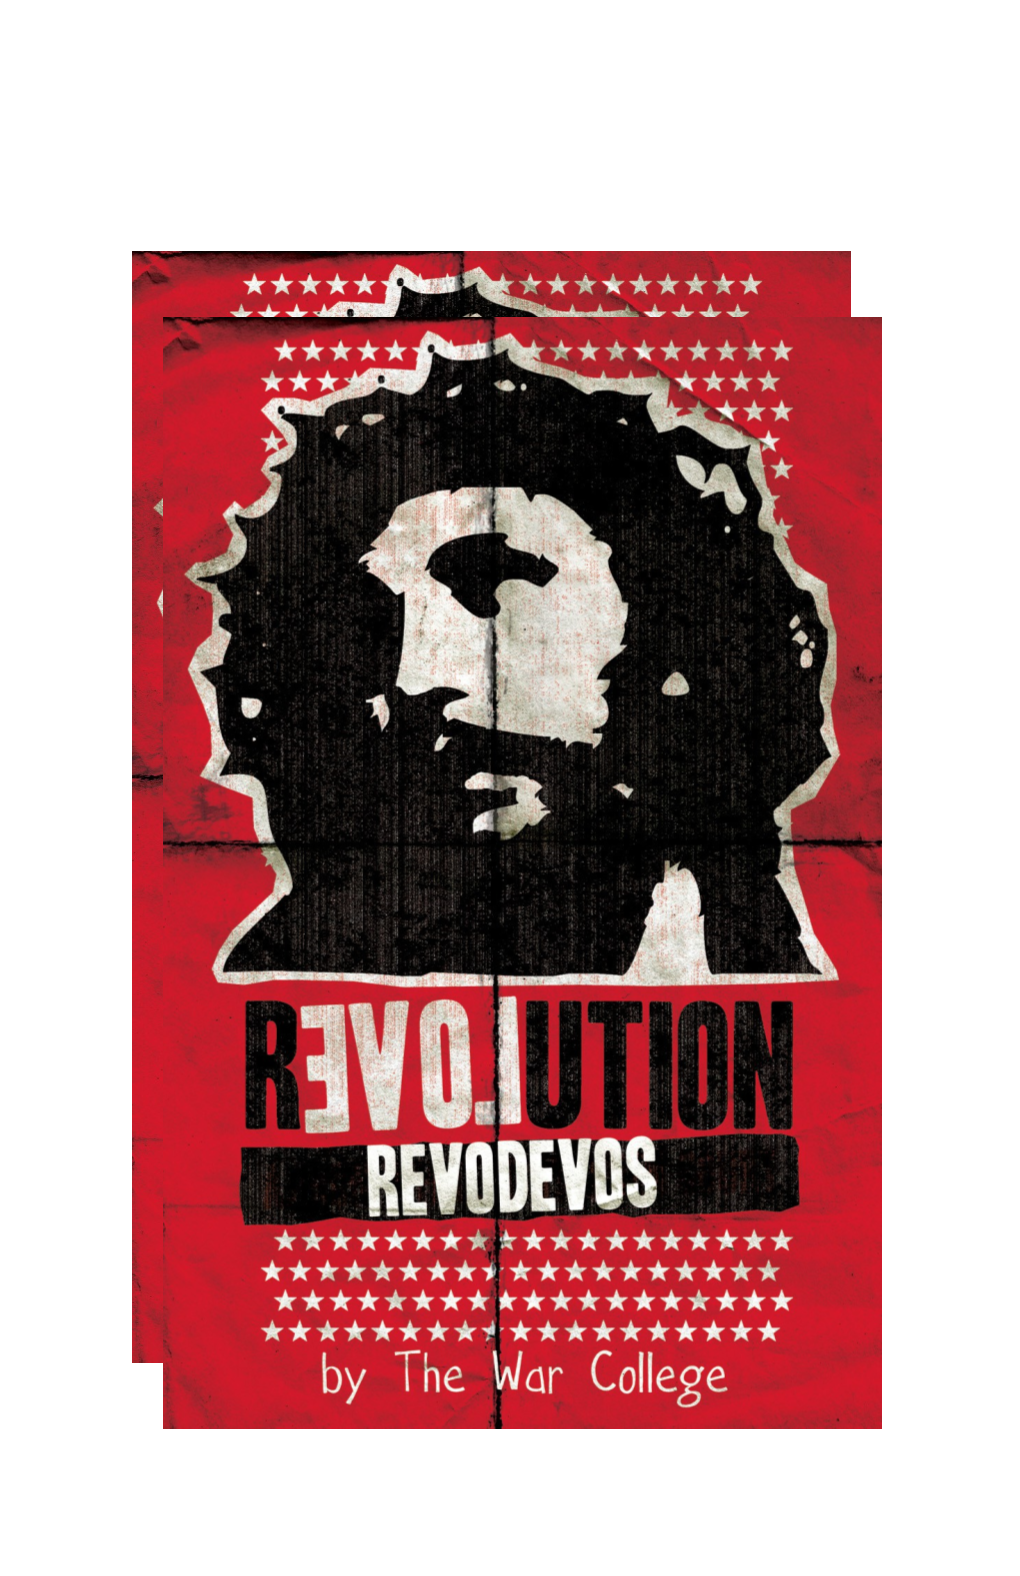 These Are the Conditions for Revolution. in Egypt, in That Day, the People of God Were